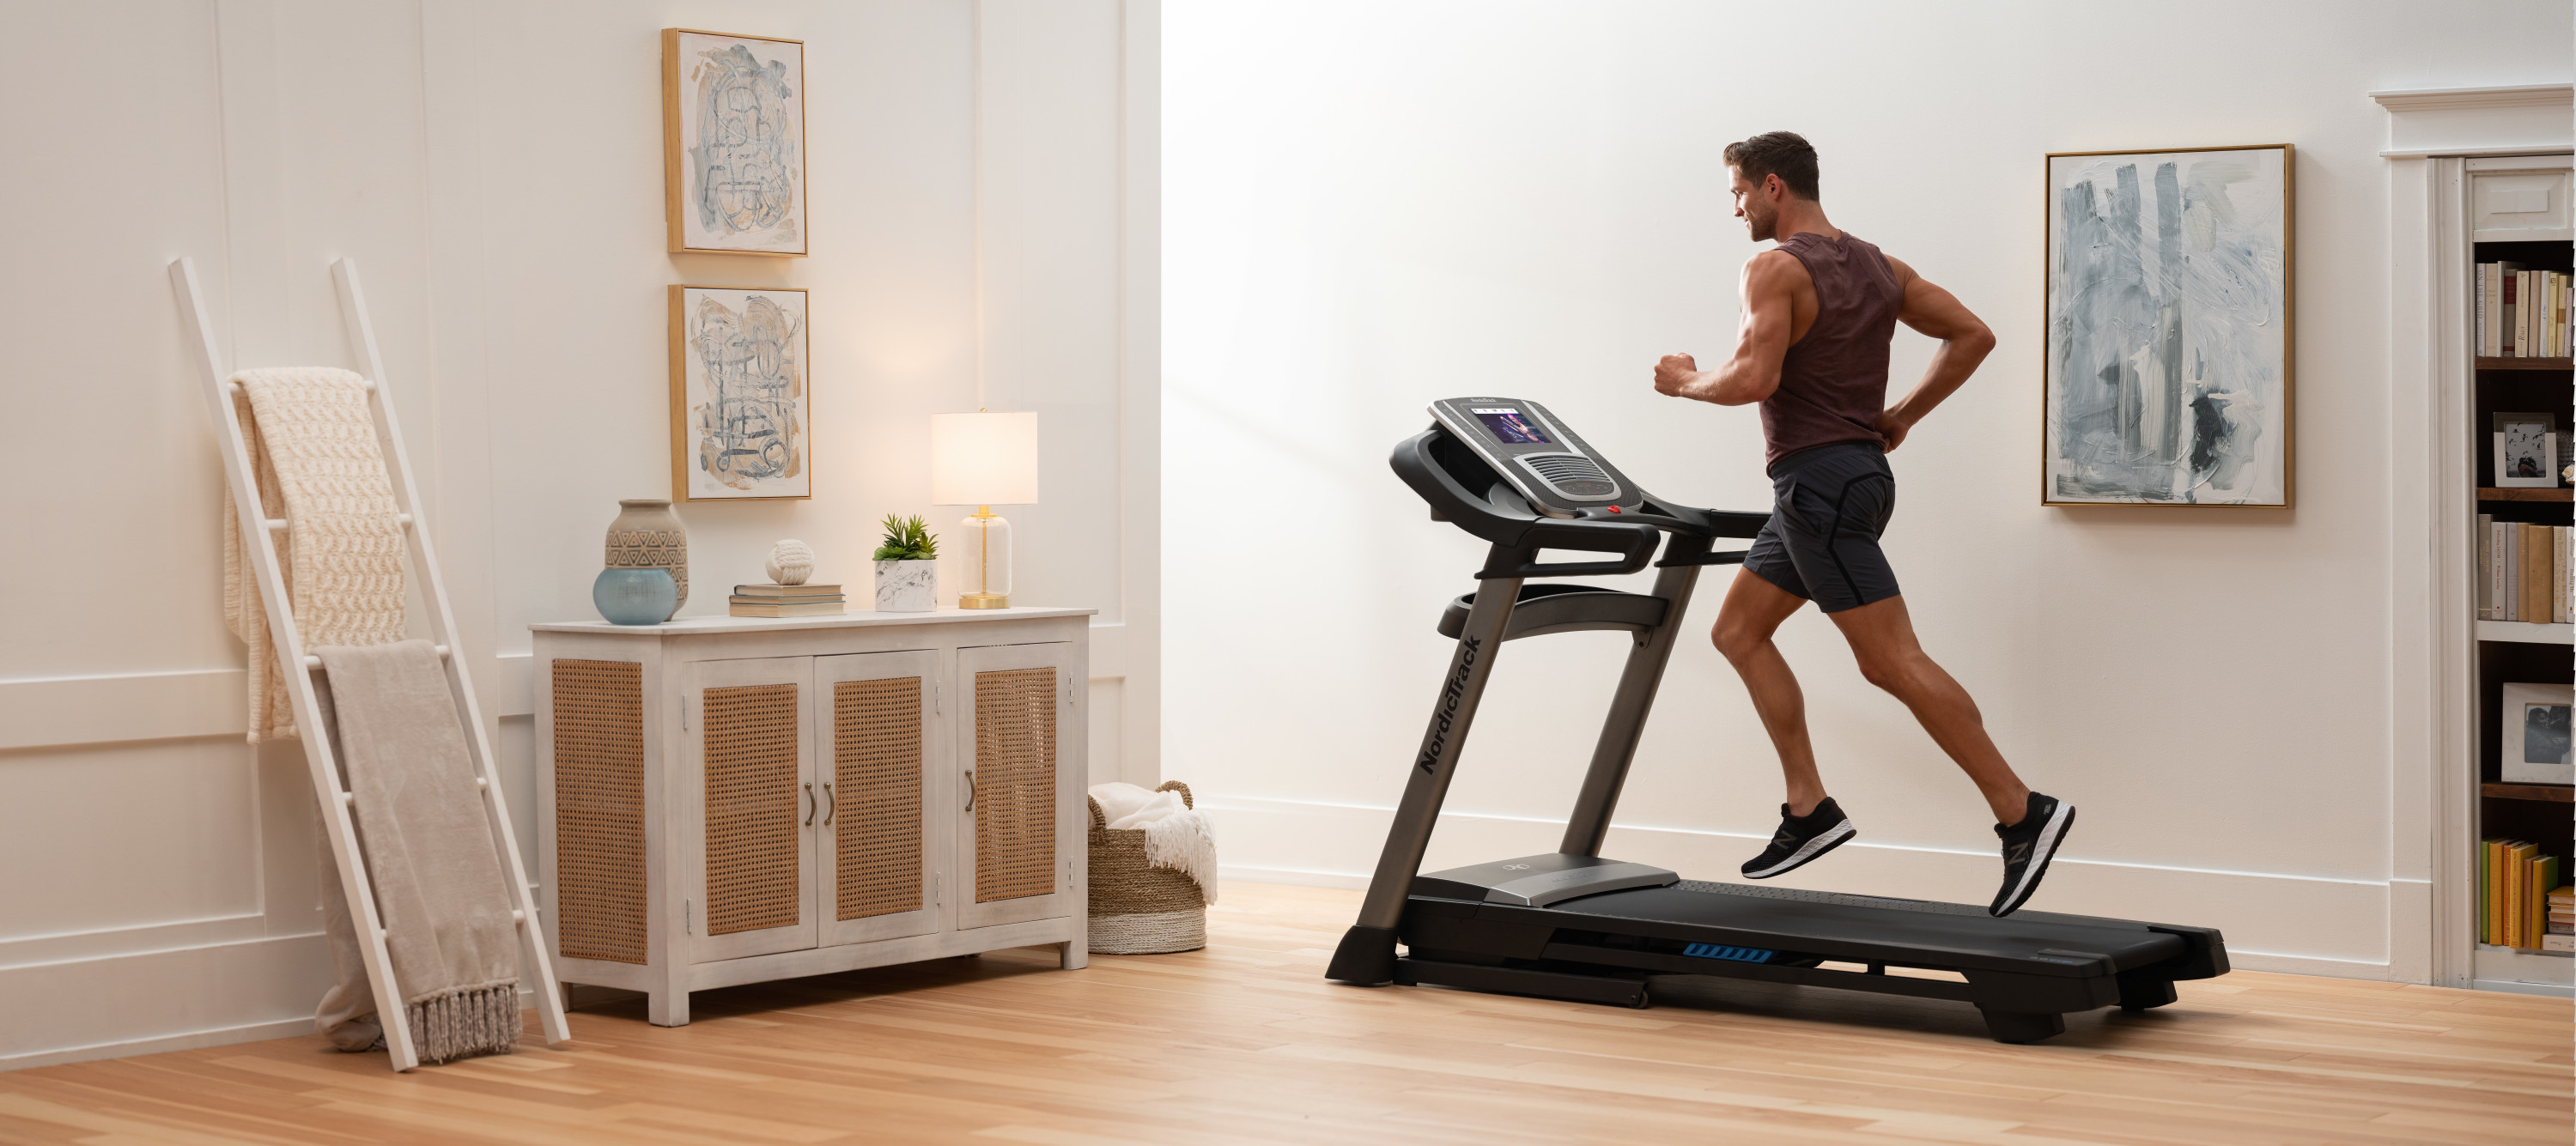 NordicTrack C 1100i Smart Treadmill with 10” Touchscreen and and 30-Day iFIT Family Membership - image 6 of 6